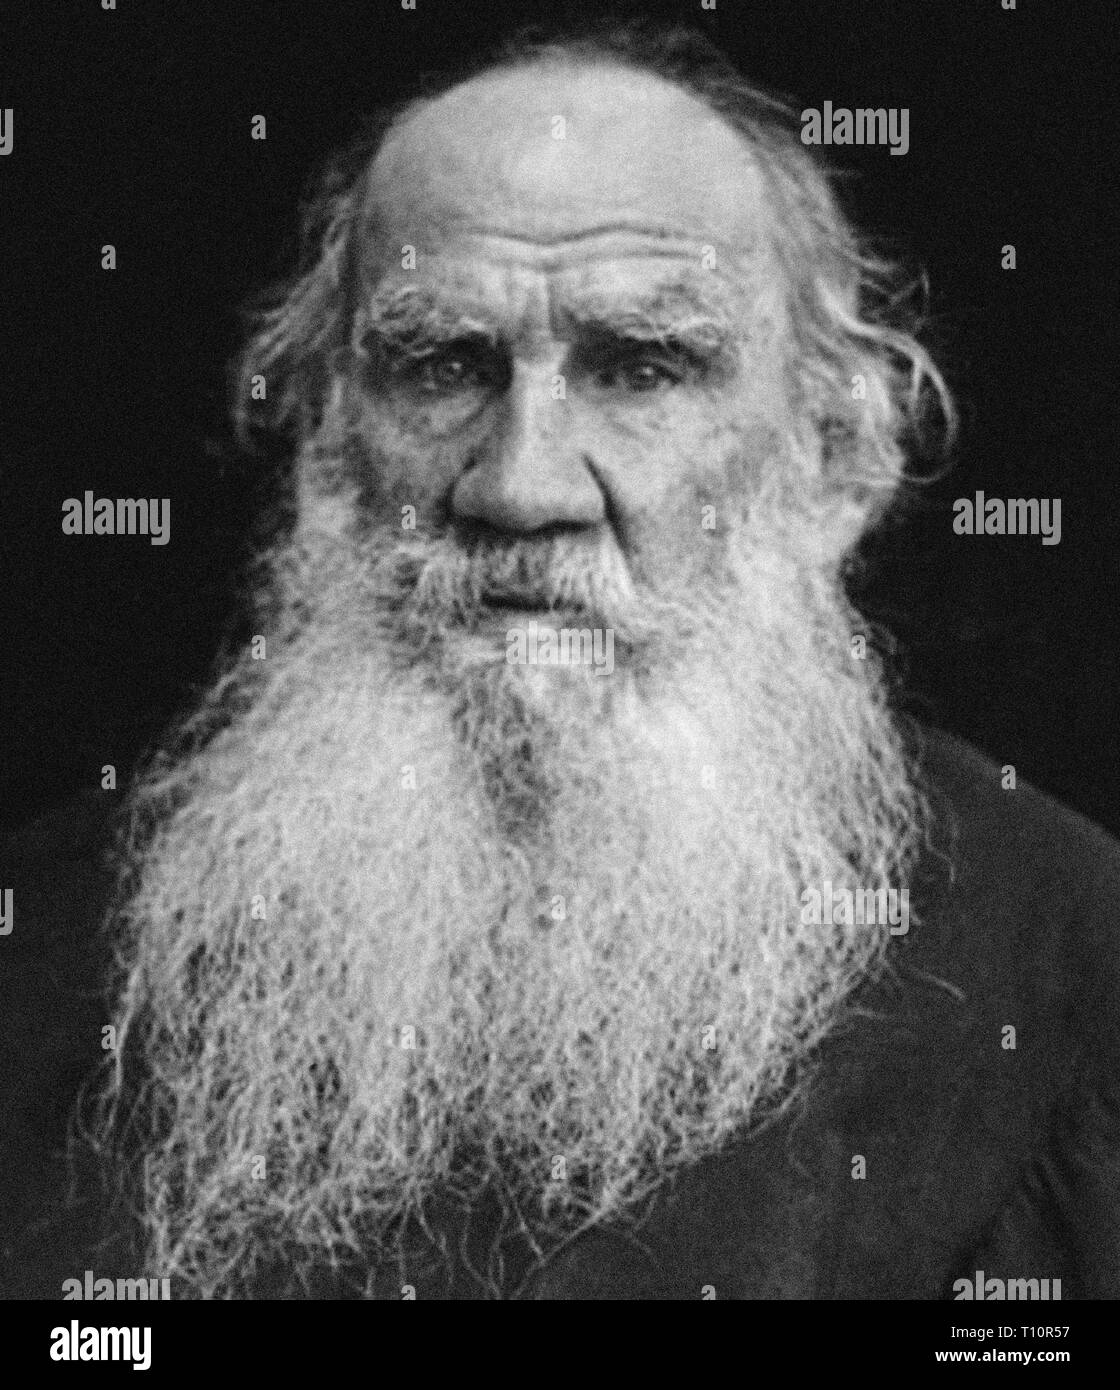 Count Lev Nikolayevich Tolstoy, usually referred to in English as Leo Tolstoy was a Russian writer who is regarded as one of the greatest authors of all time. Scanned from image material in the archives of Press Portrait Service - (formerly Press Portrait Bureau). Stock Photo